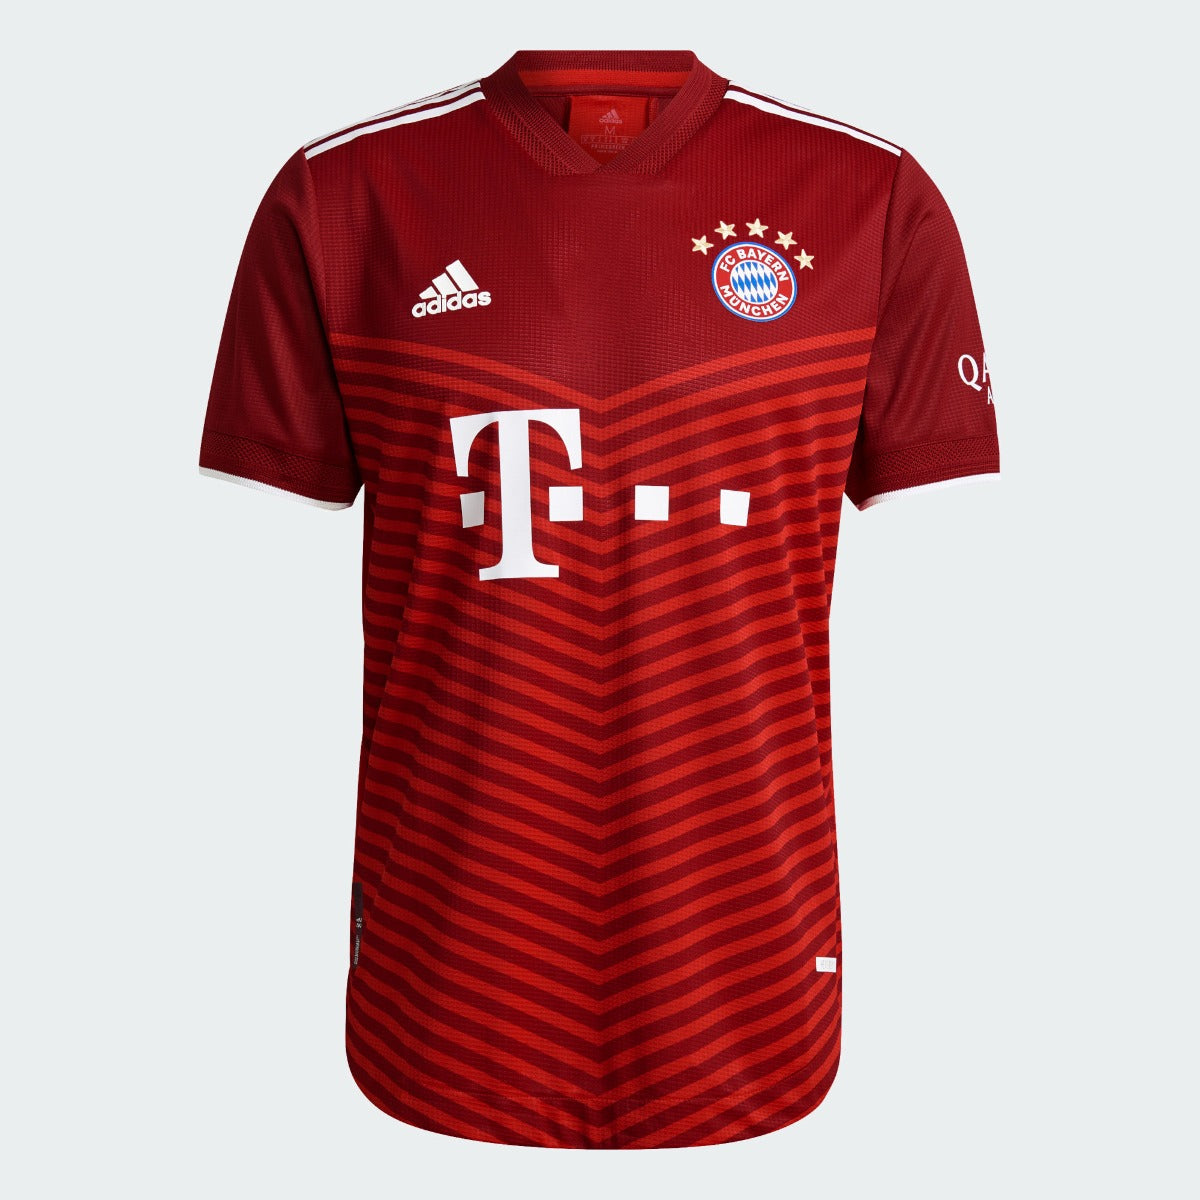 Adidas 2021-22 Bayern Munich Home Authentic Jersey - True Red (Front)